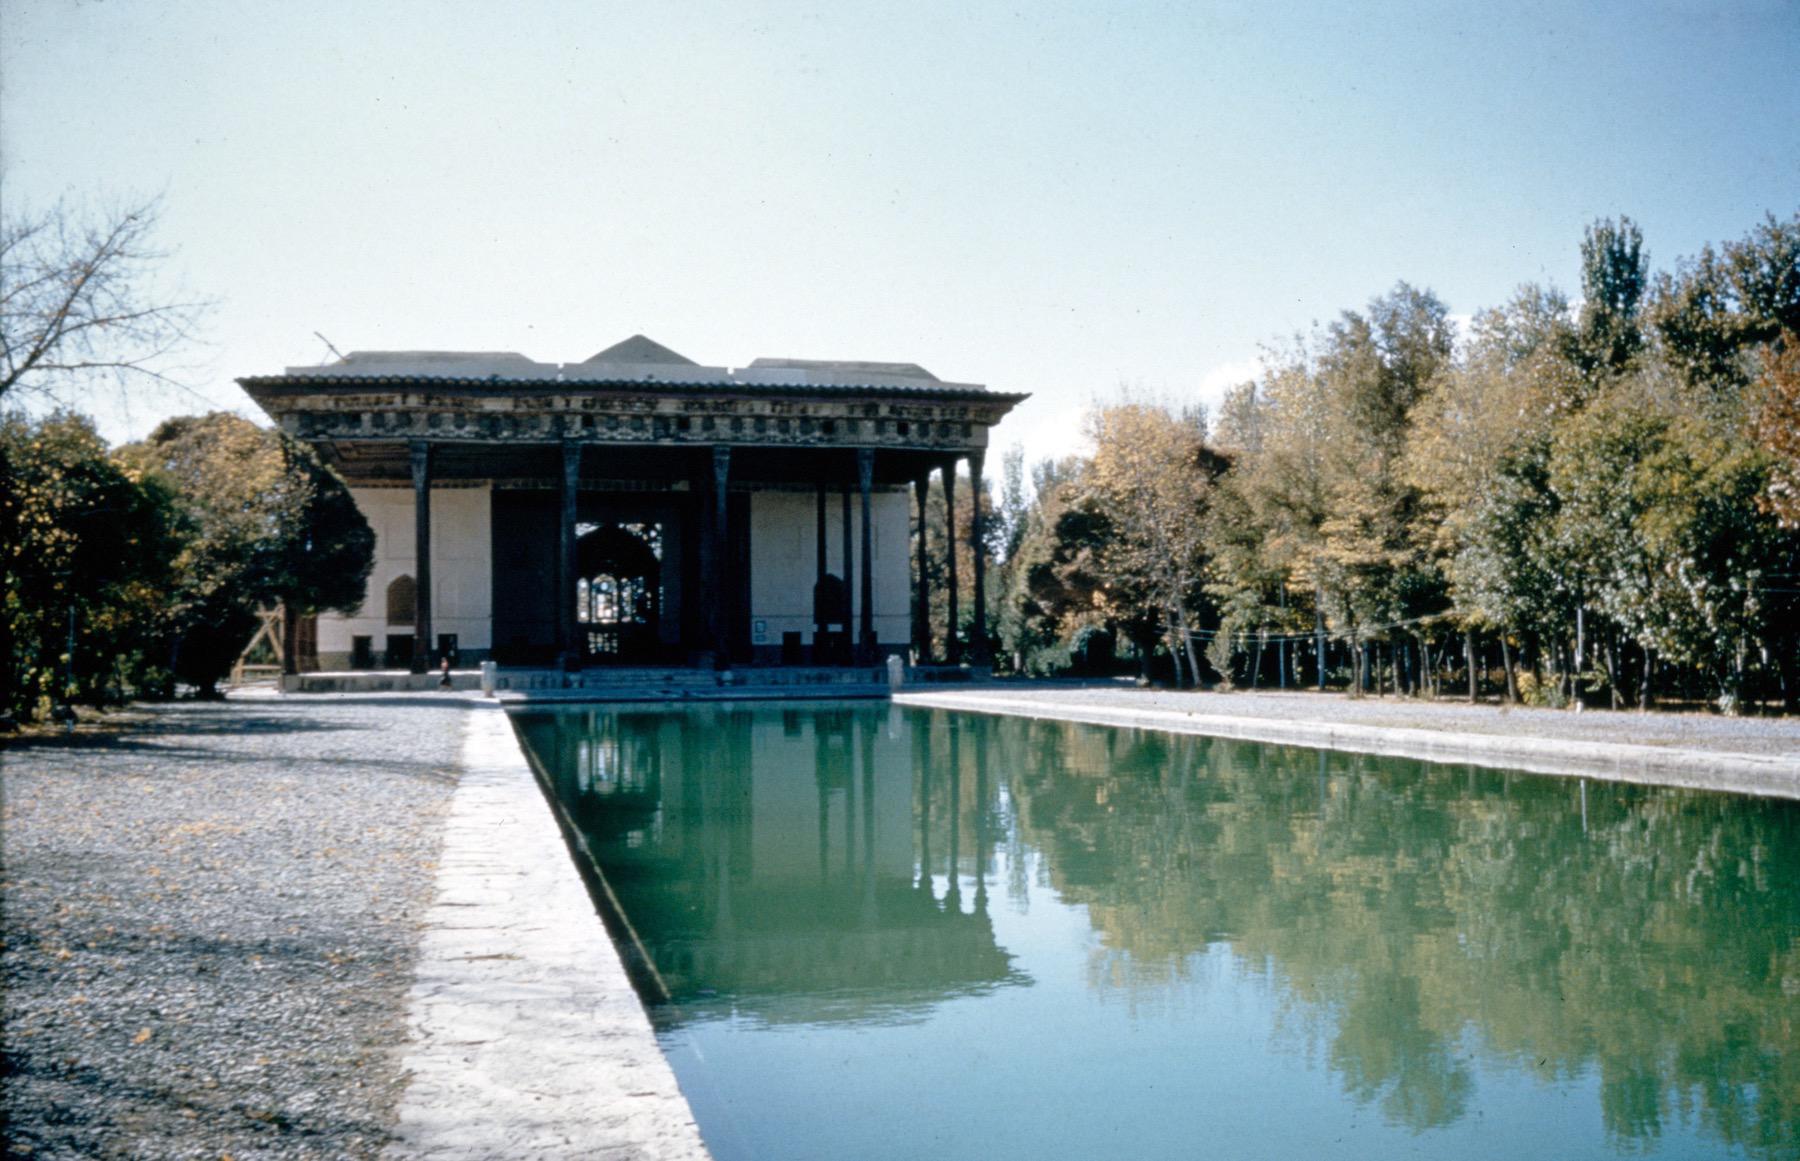 General view from east showing east facade, pool, and talar porch.